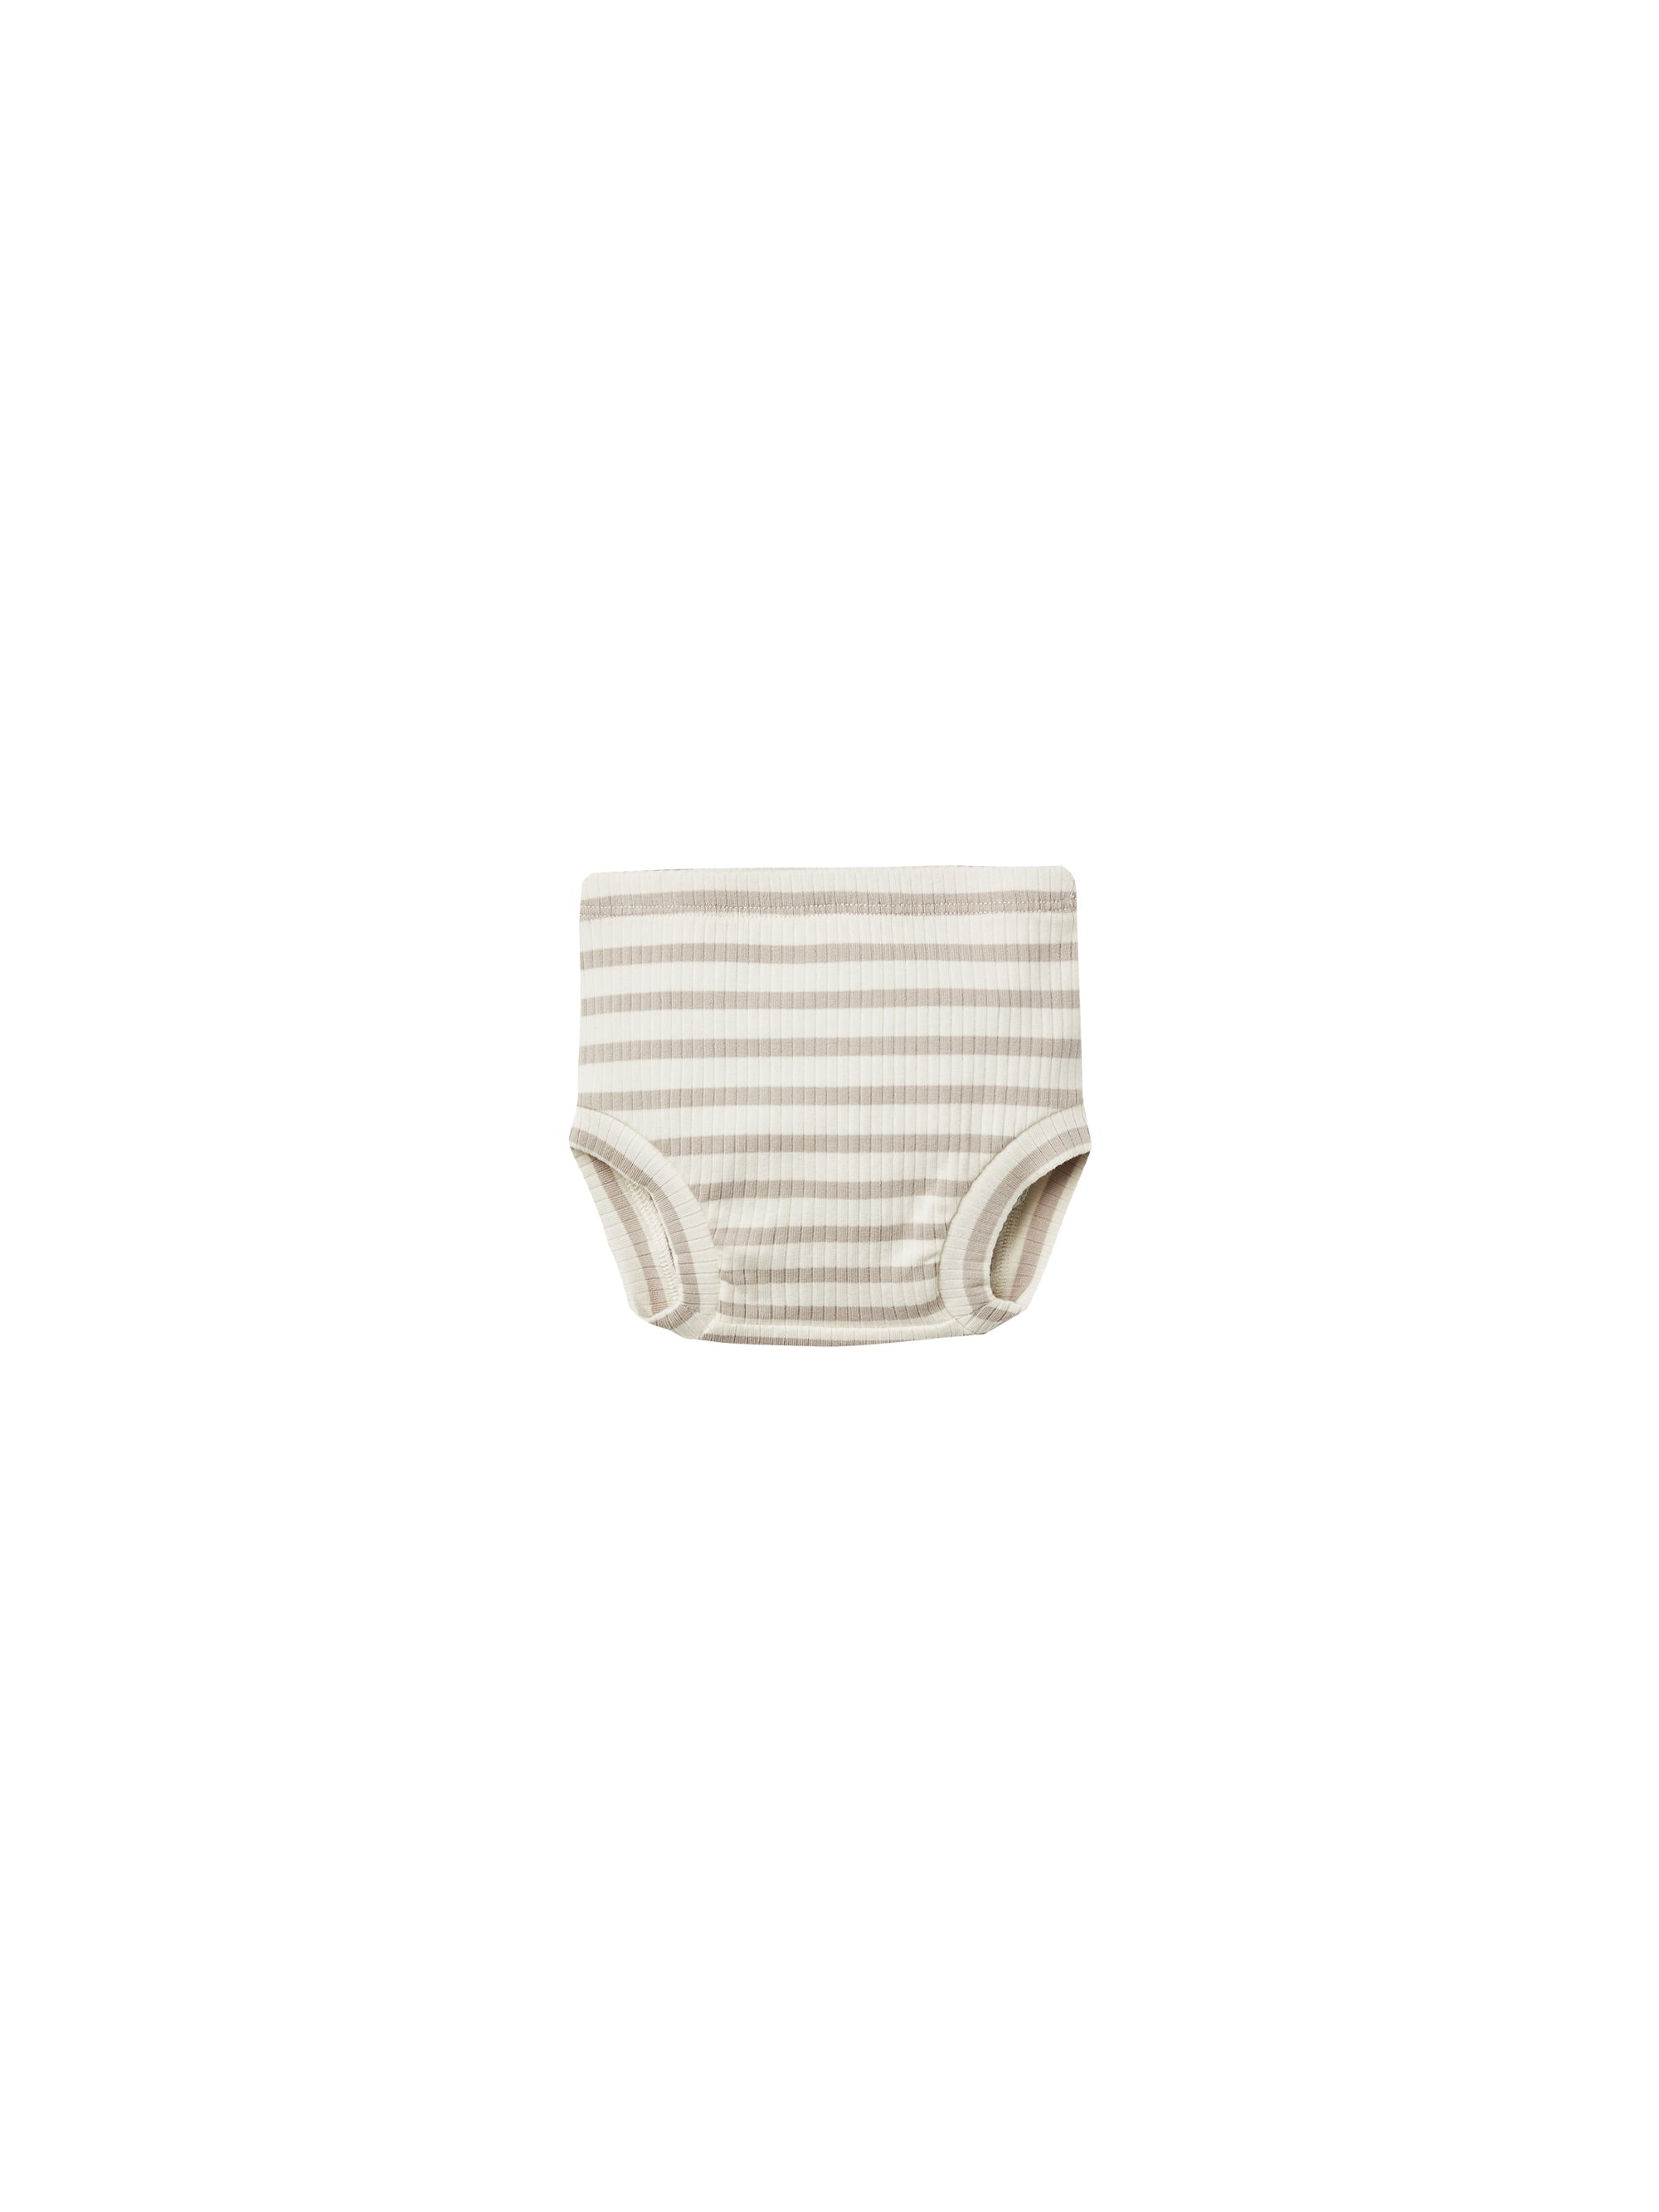 QUINCY MAE RIBBED BLOOMER / WIDE ASH STRIPE